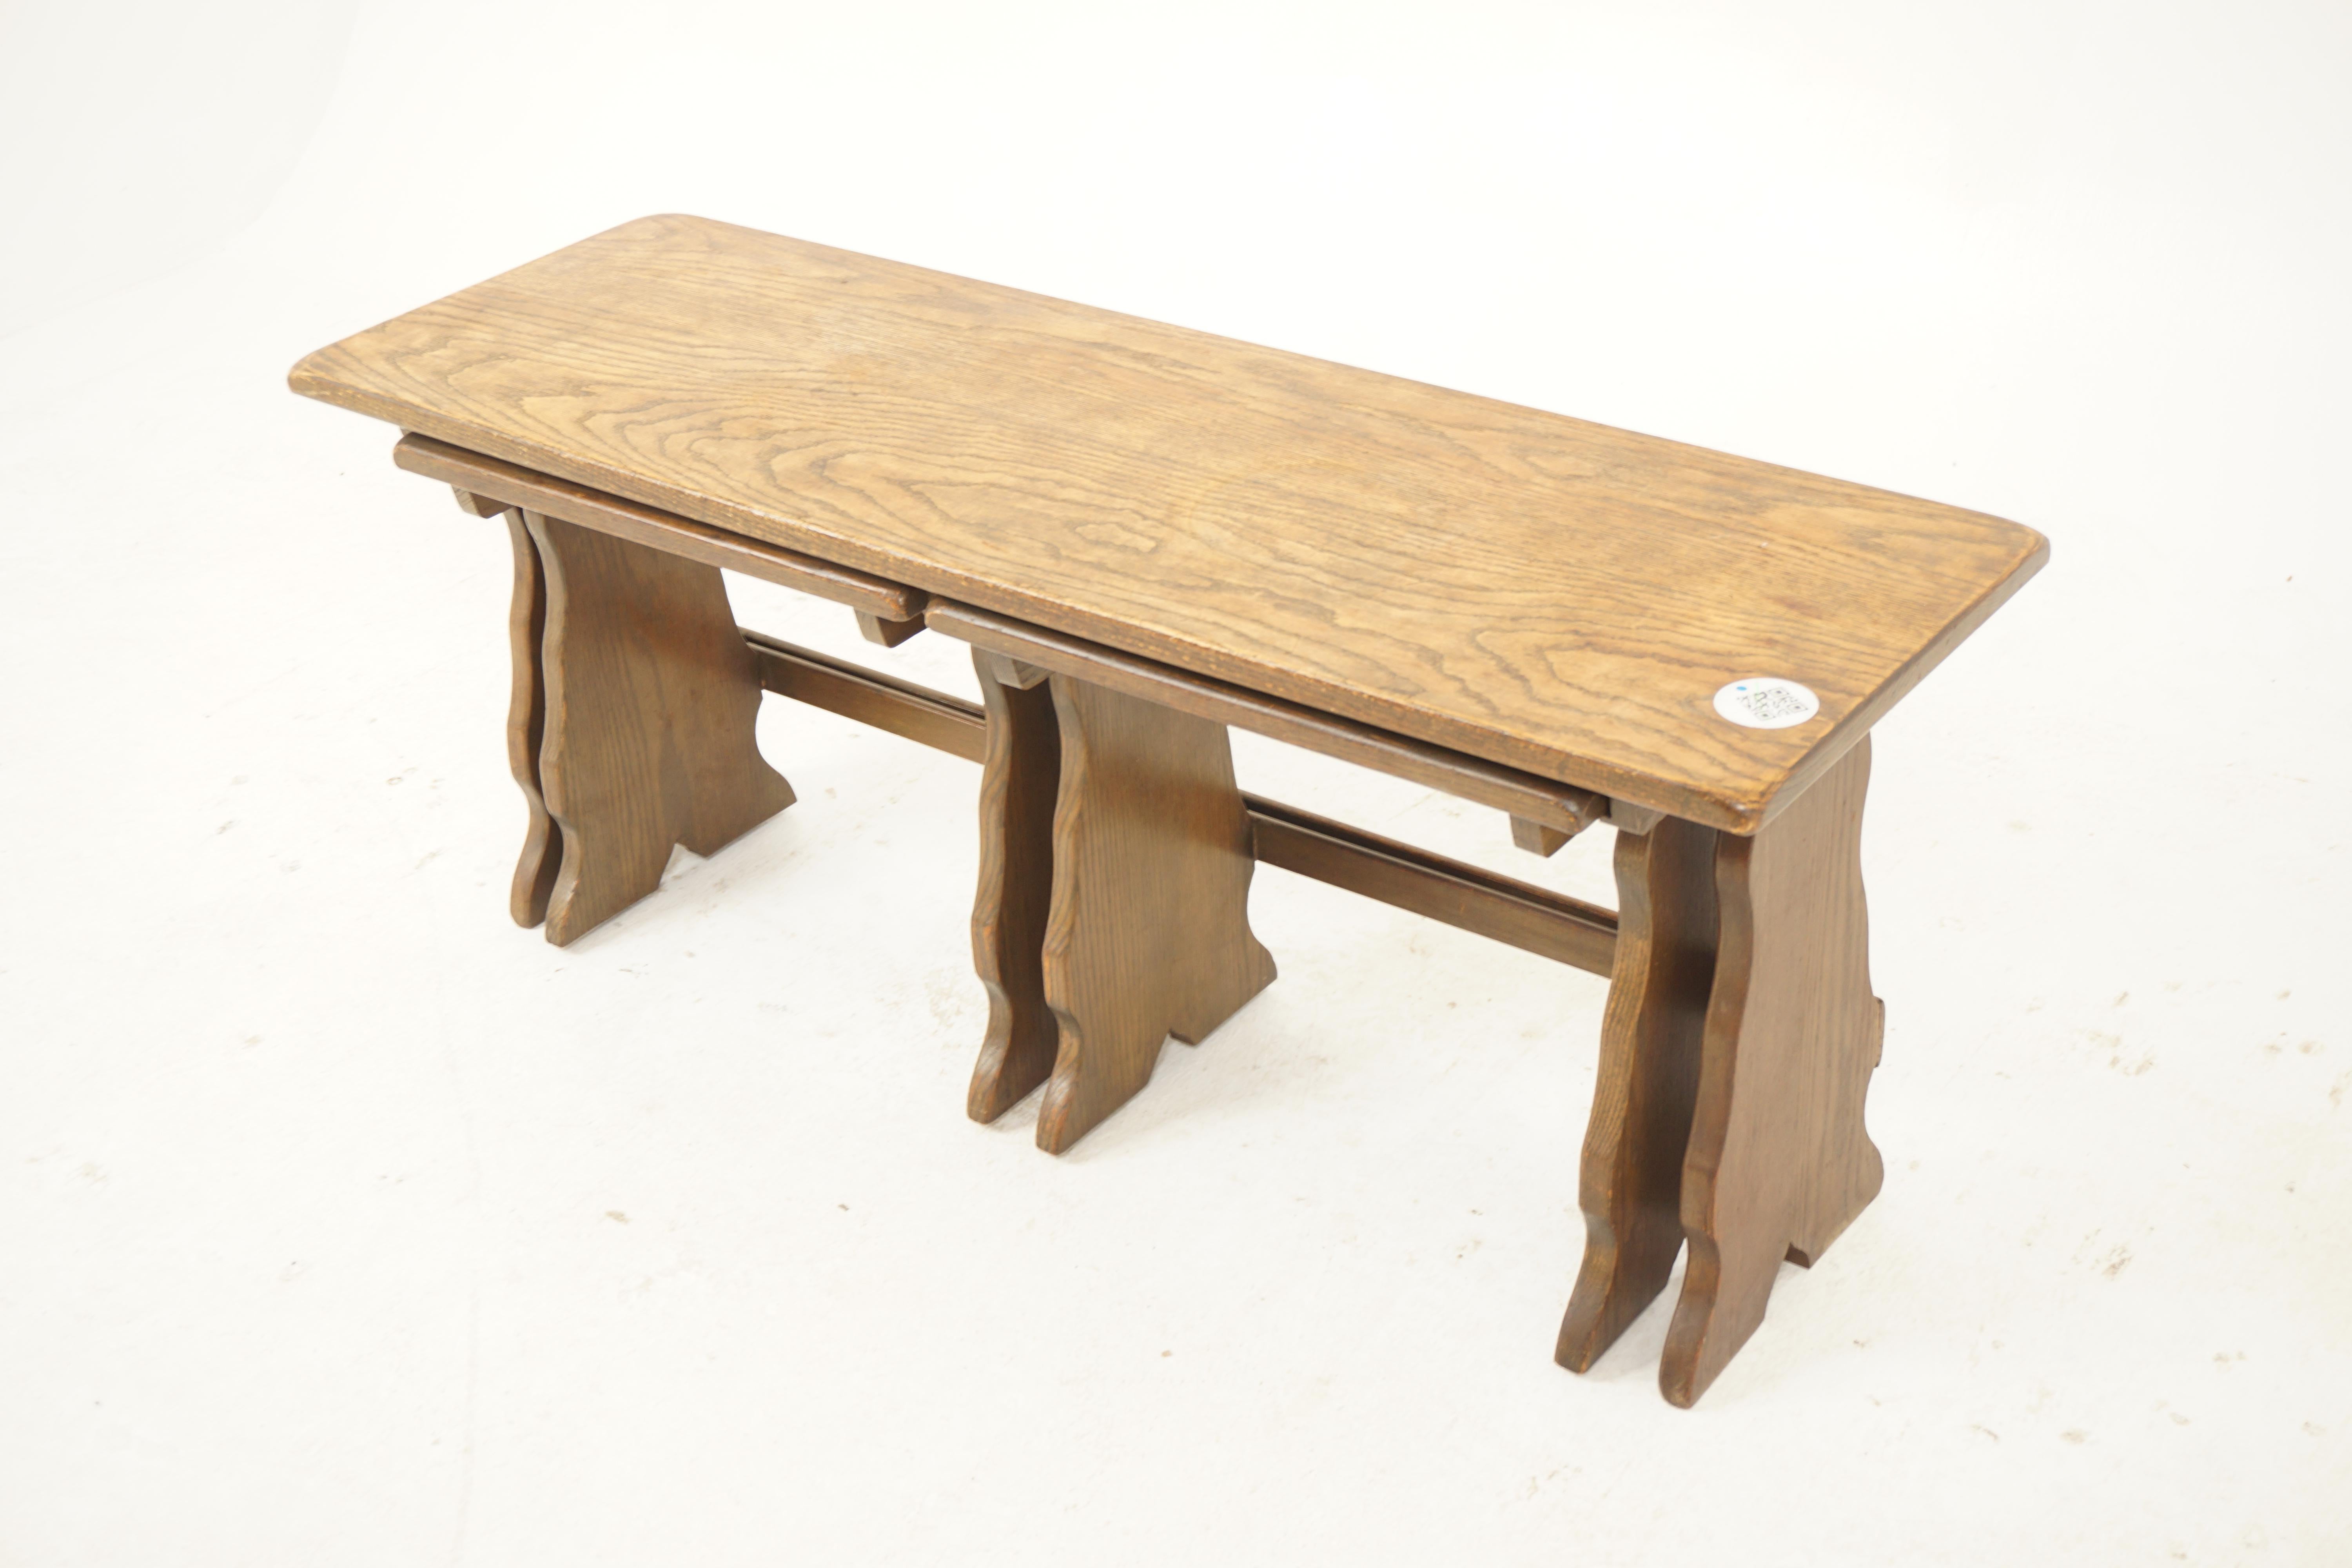 Large Oak nesting table, end tables, Scotland 1930, H193

Scotland 1930
Solid Oak
Original Finish
Rectangular solid oak top with rounded ends for all three tables
Shaped solid Oak ends
Please note the two smaller tables have not been used